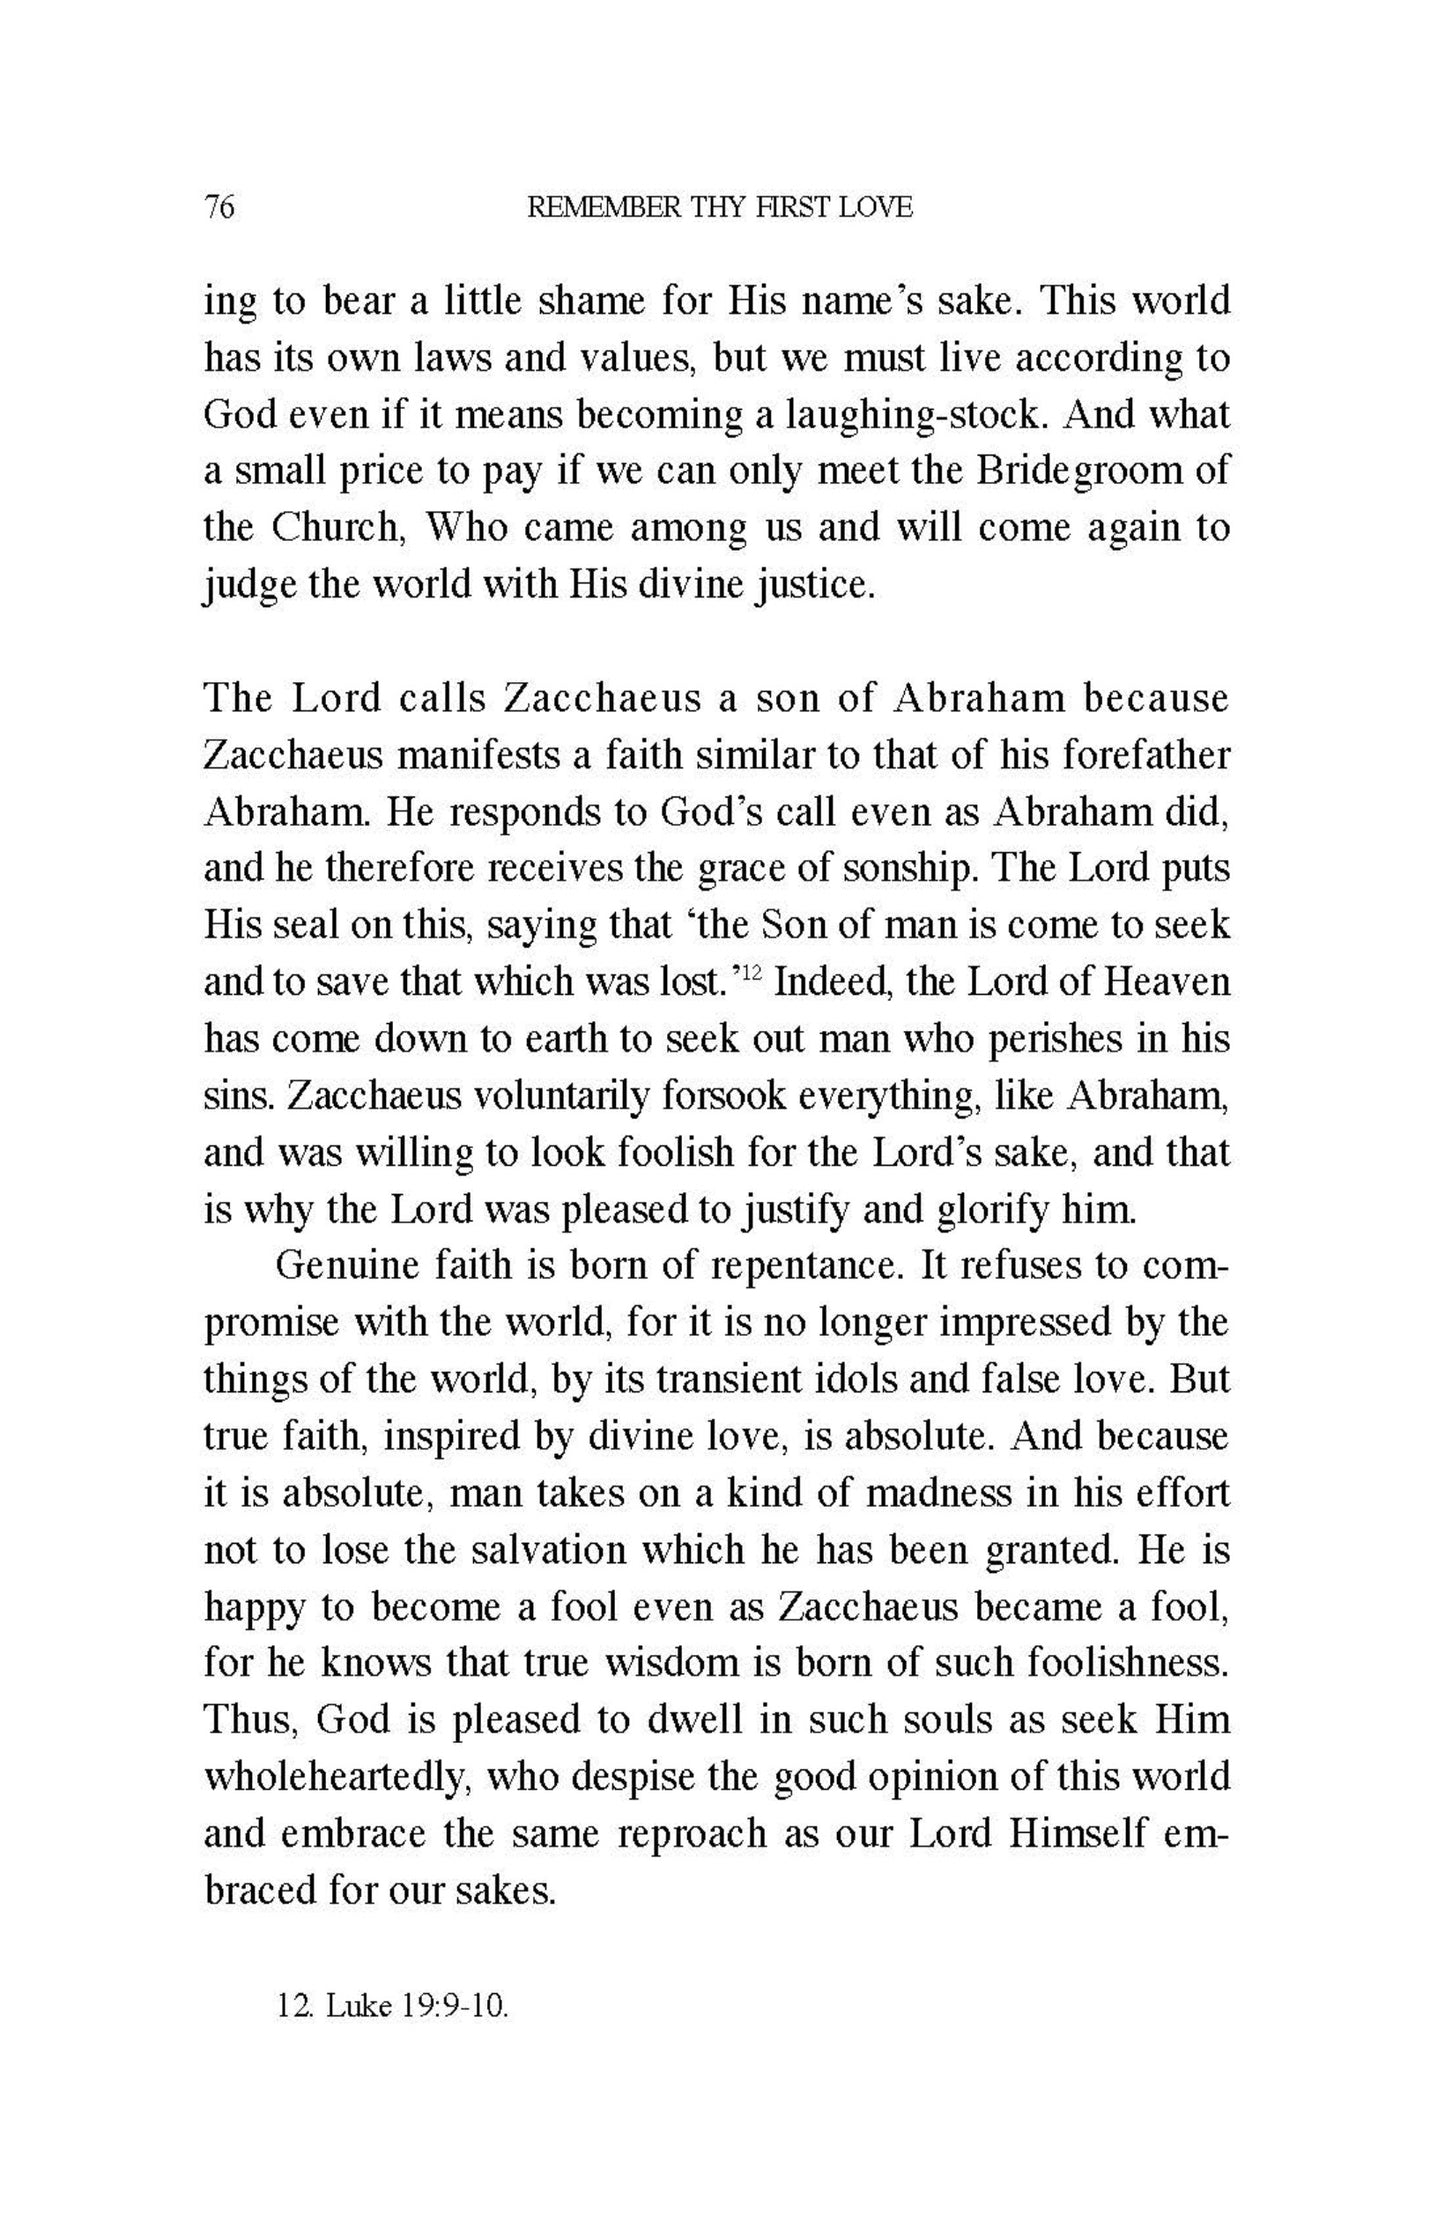 Remember Thy First Love, by Archimandrite Zacharias